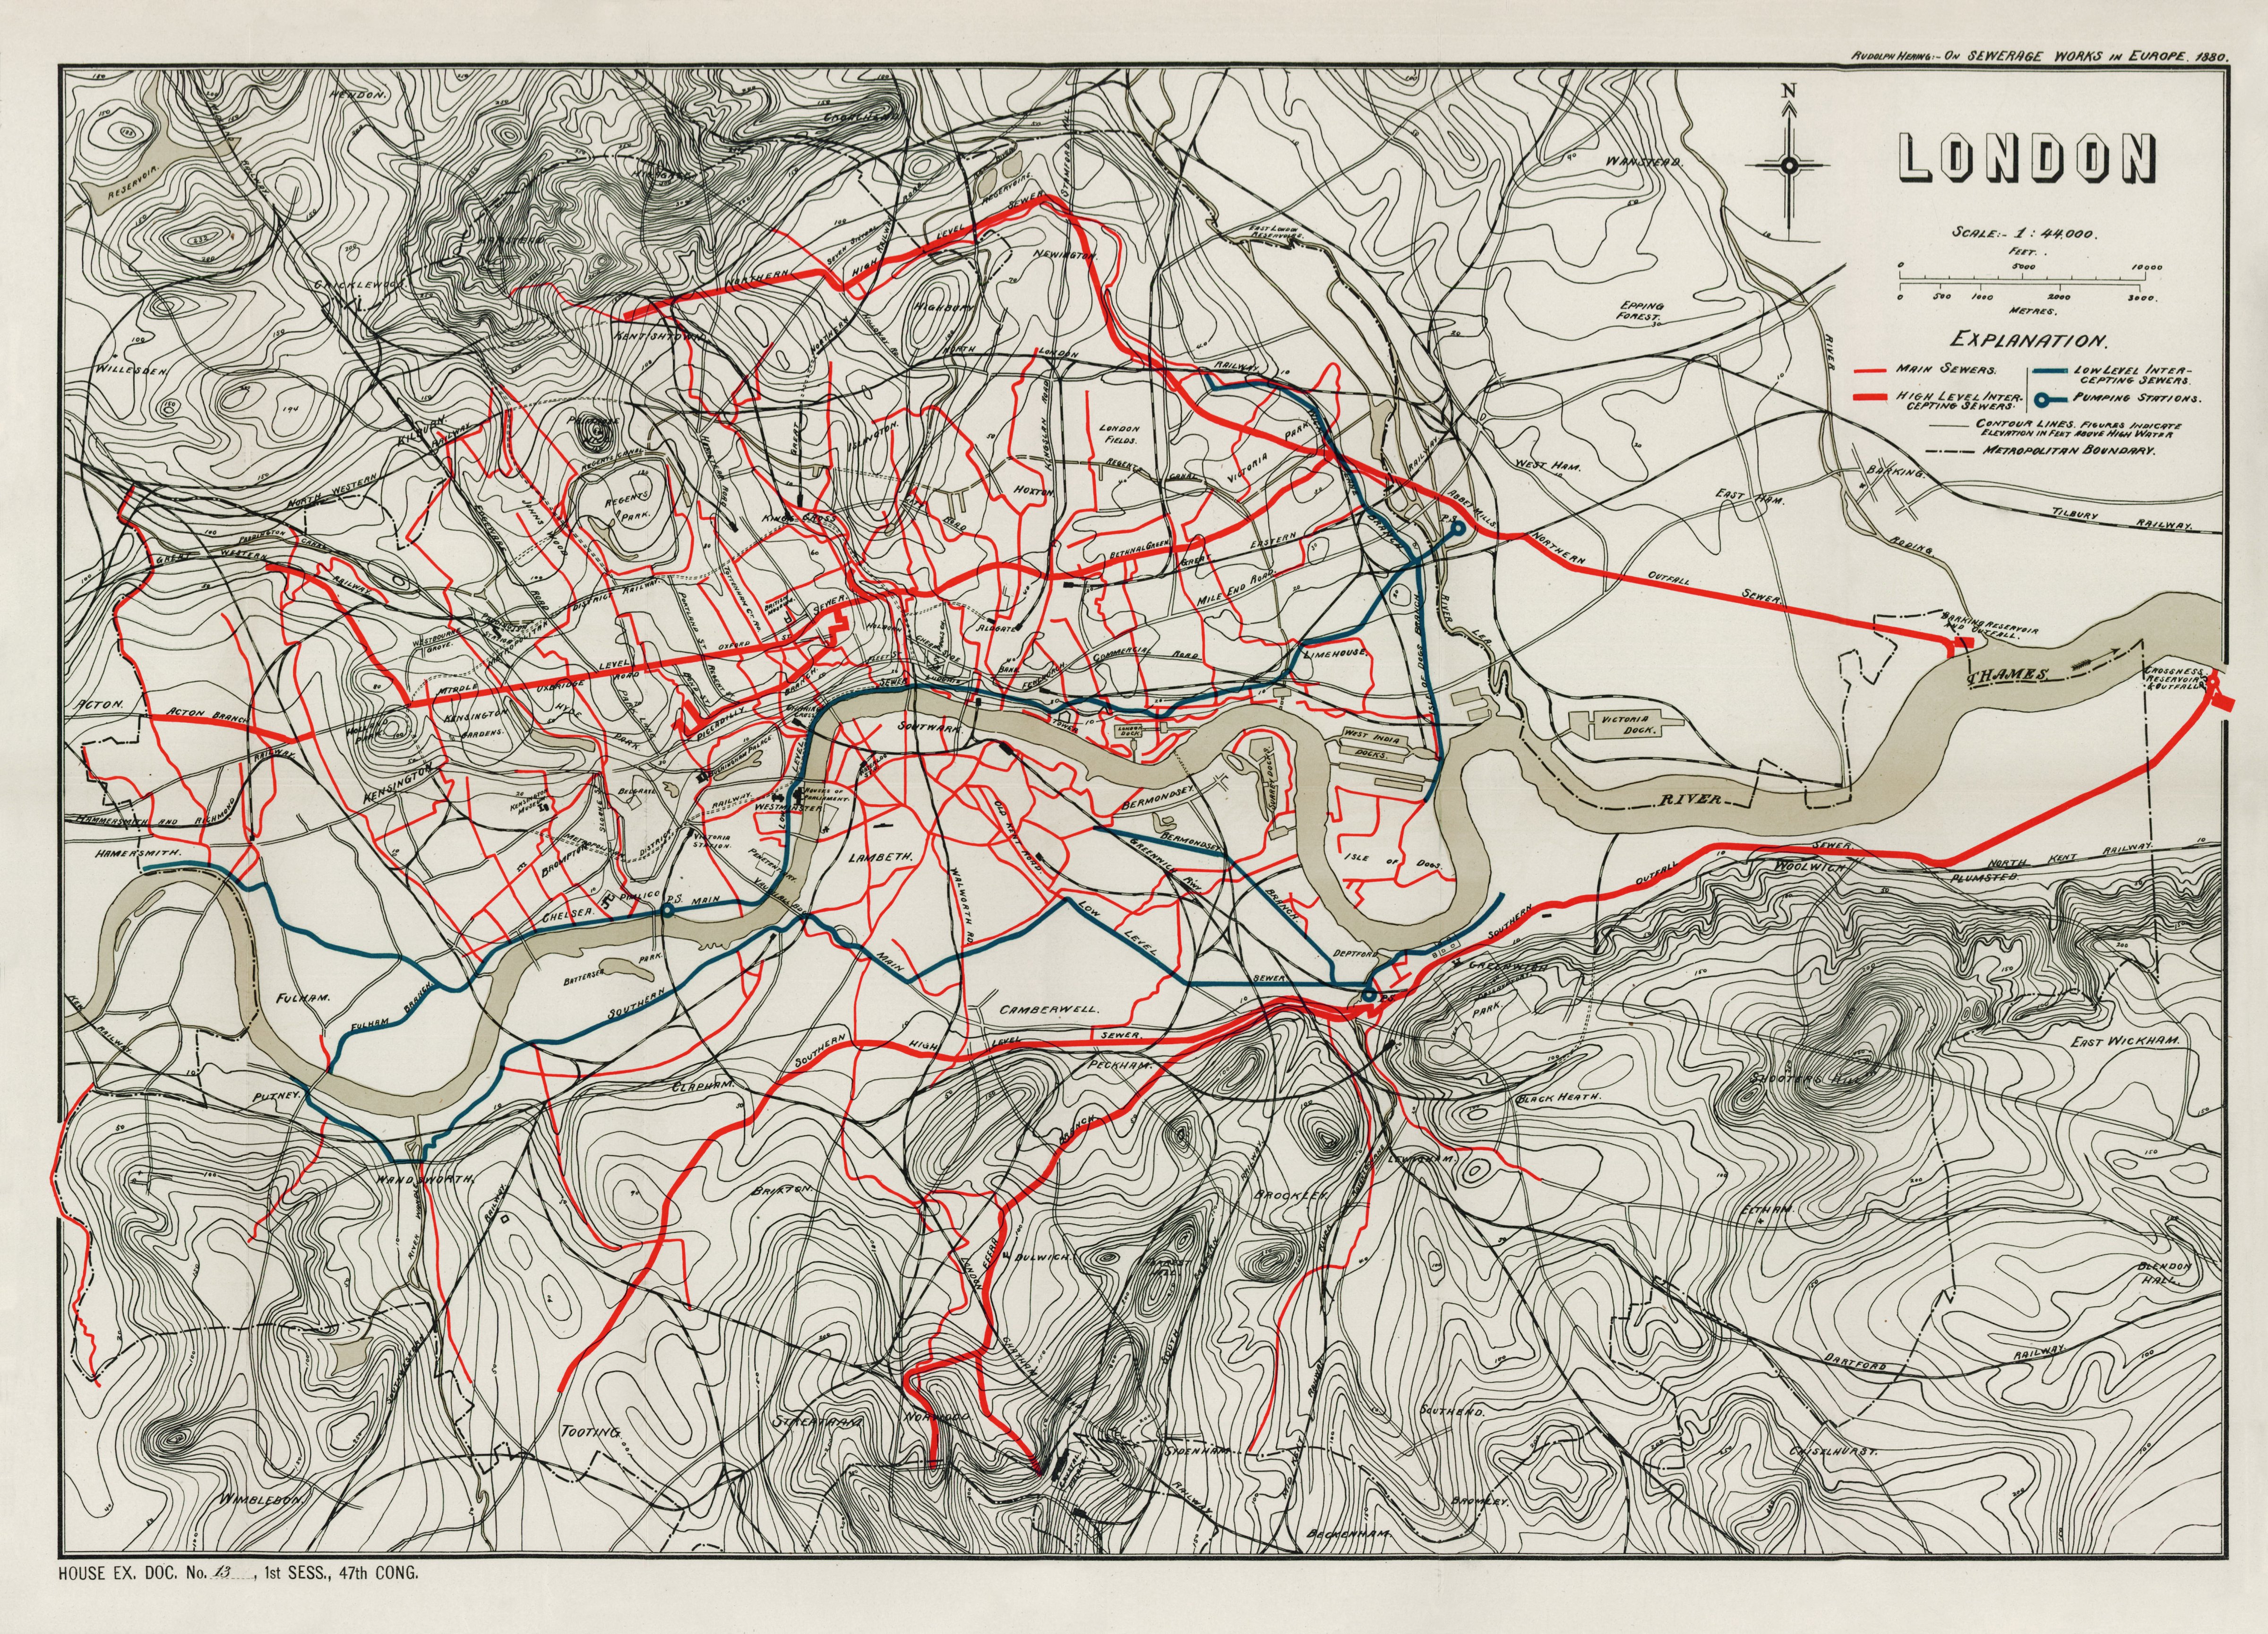 Sir Joseph Bazalgette was the creator of London’s great Victorian sewage system, depicted here on this map. The most prominent red lines are the main interception sewers. (Courtesy of the Library of Congress, Washington, D.C.)